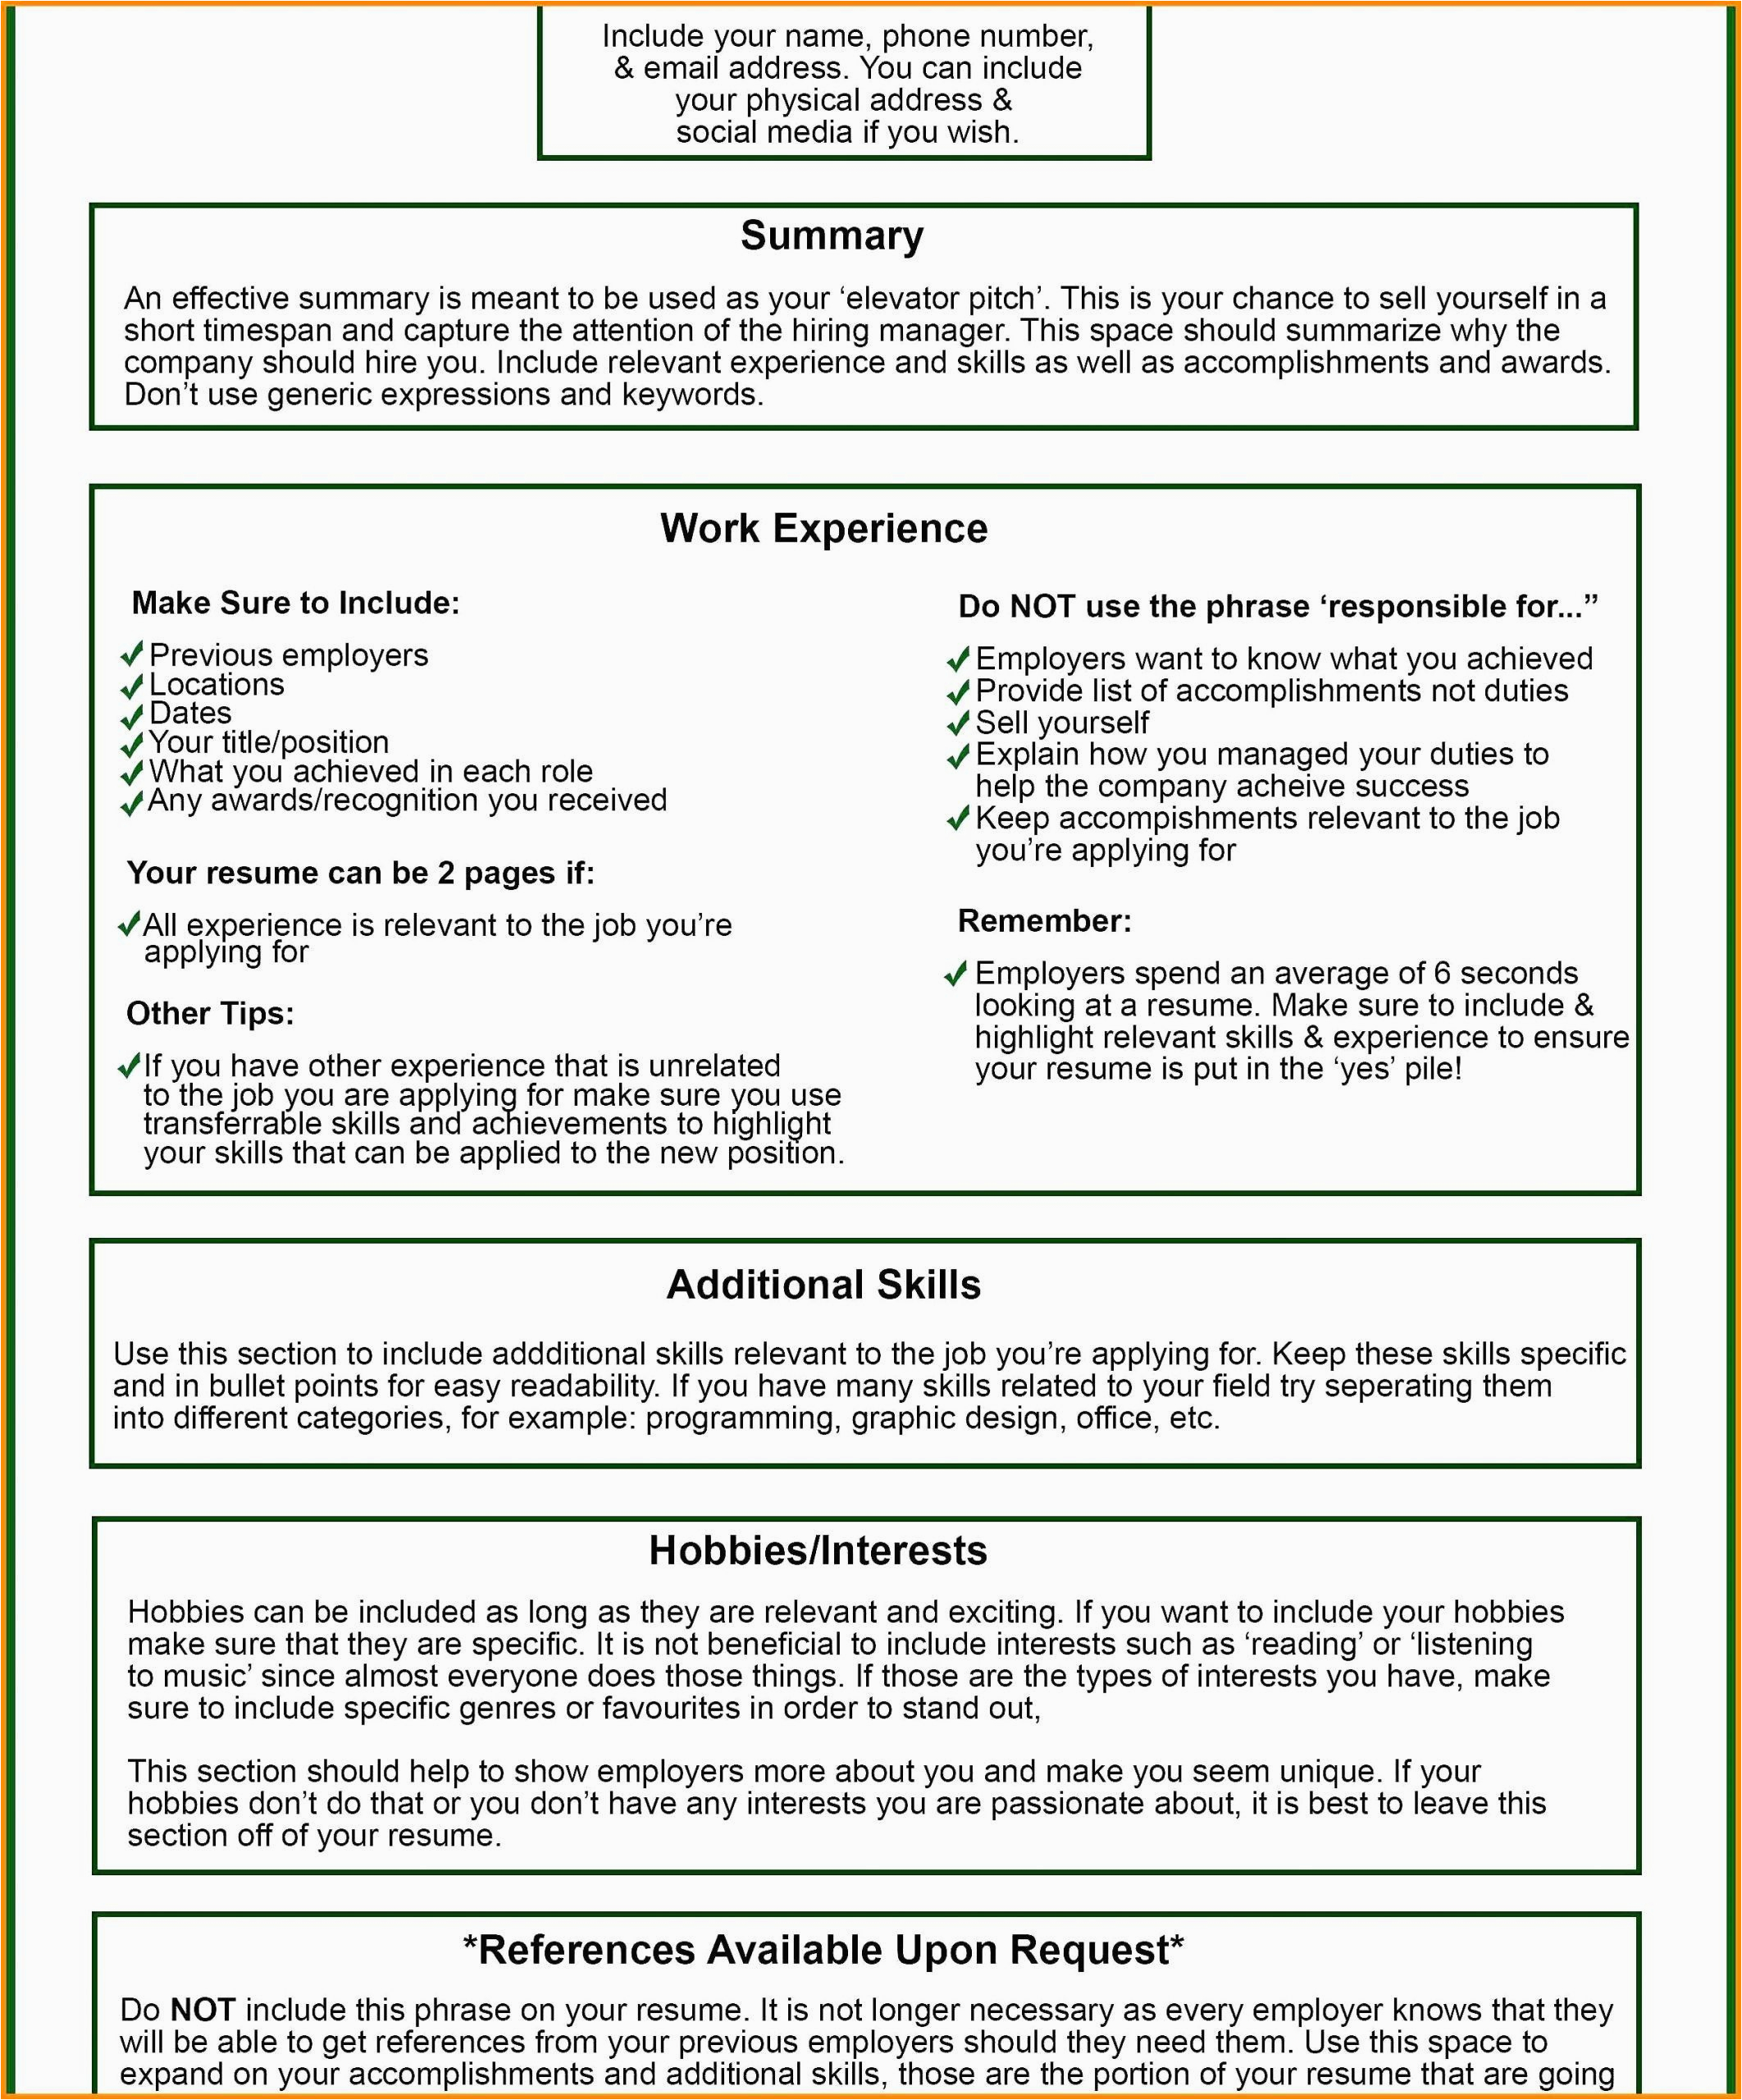 Sample Of Special Skills and Interest In Resume Template for Letter Interest Luxury Resumes Hobbies and